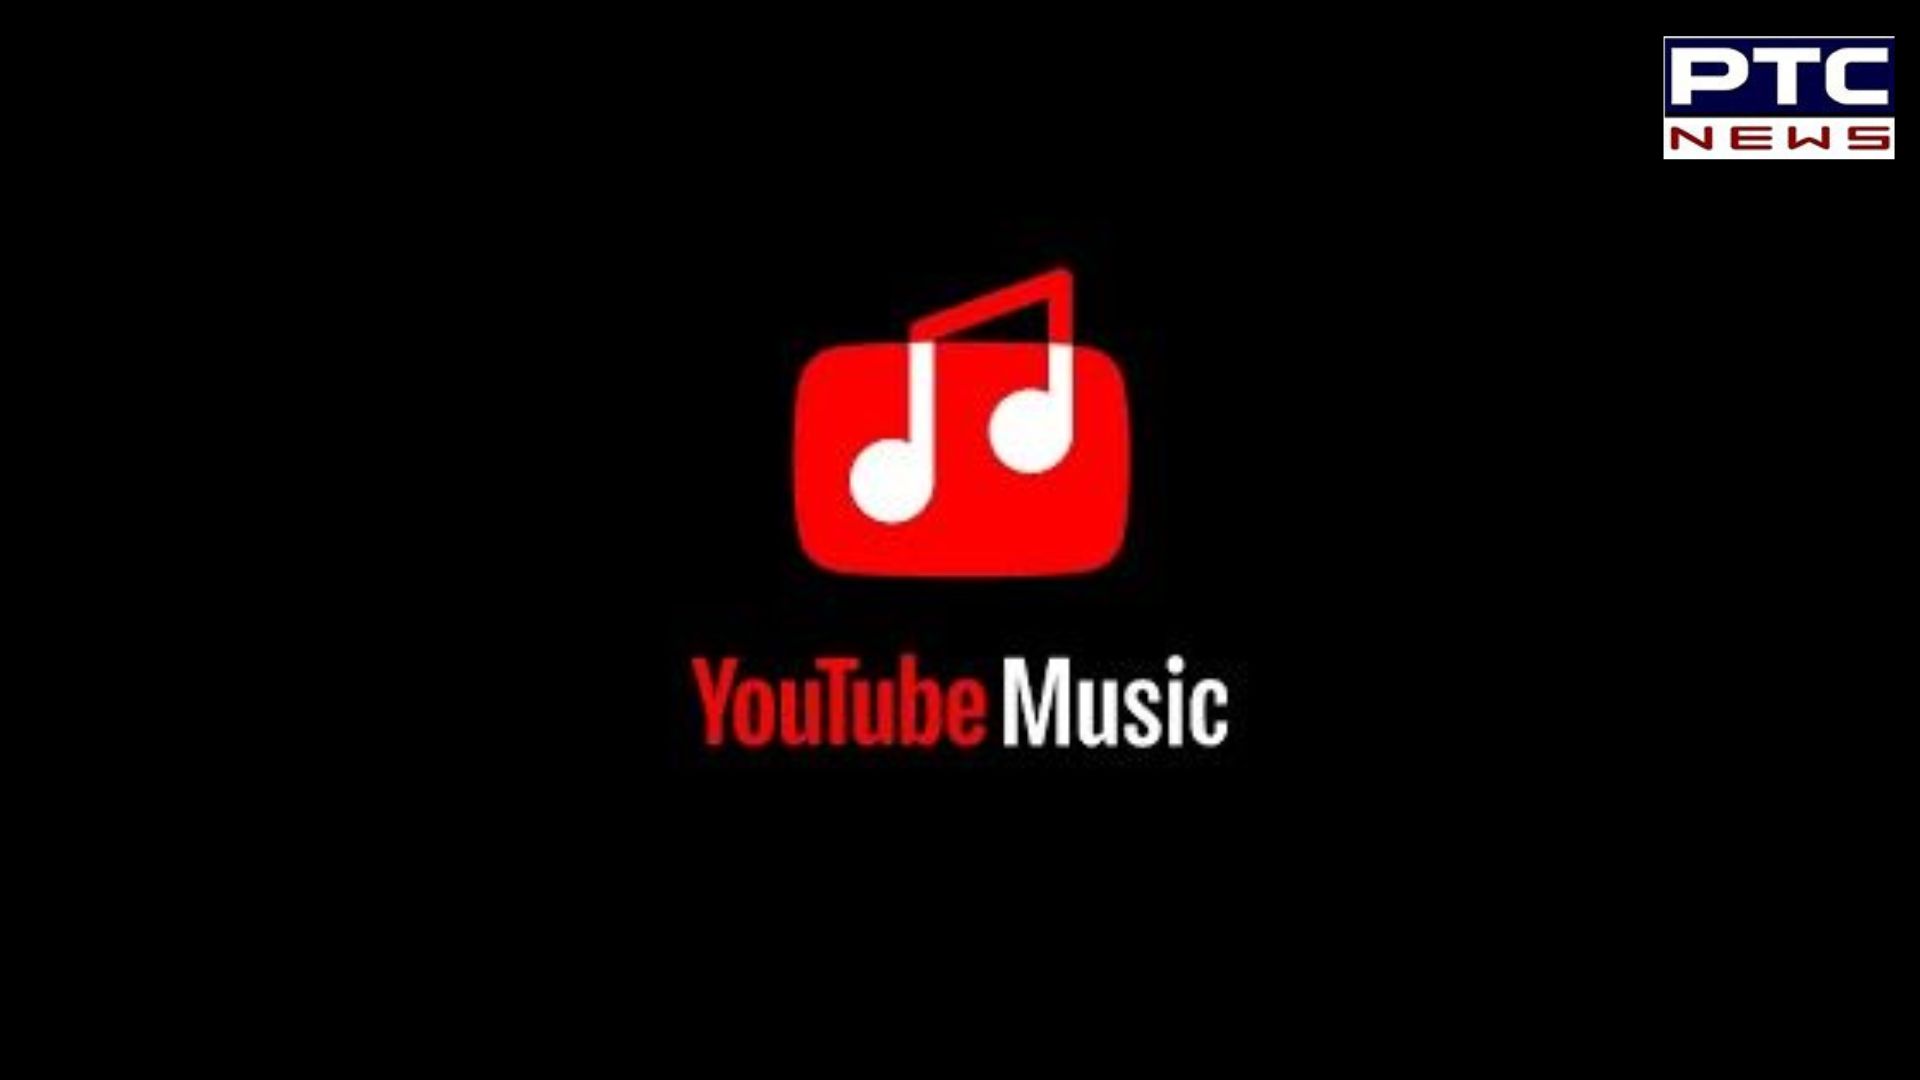 Just hum or sing to search songs on YouTube Music; a new feature to be out soon